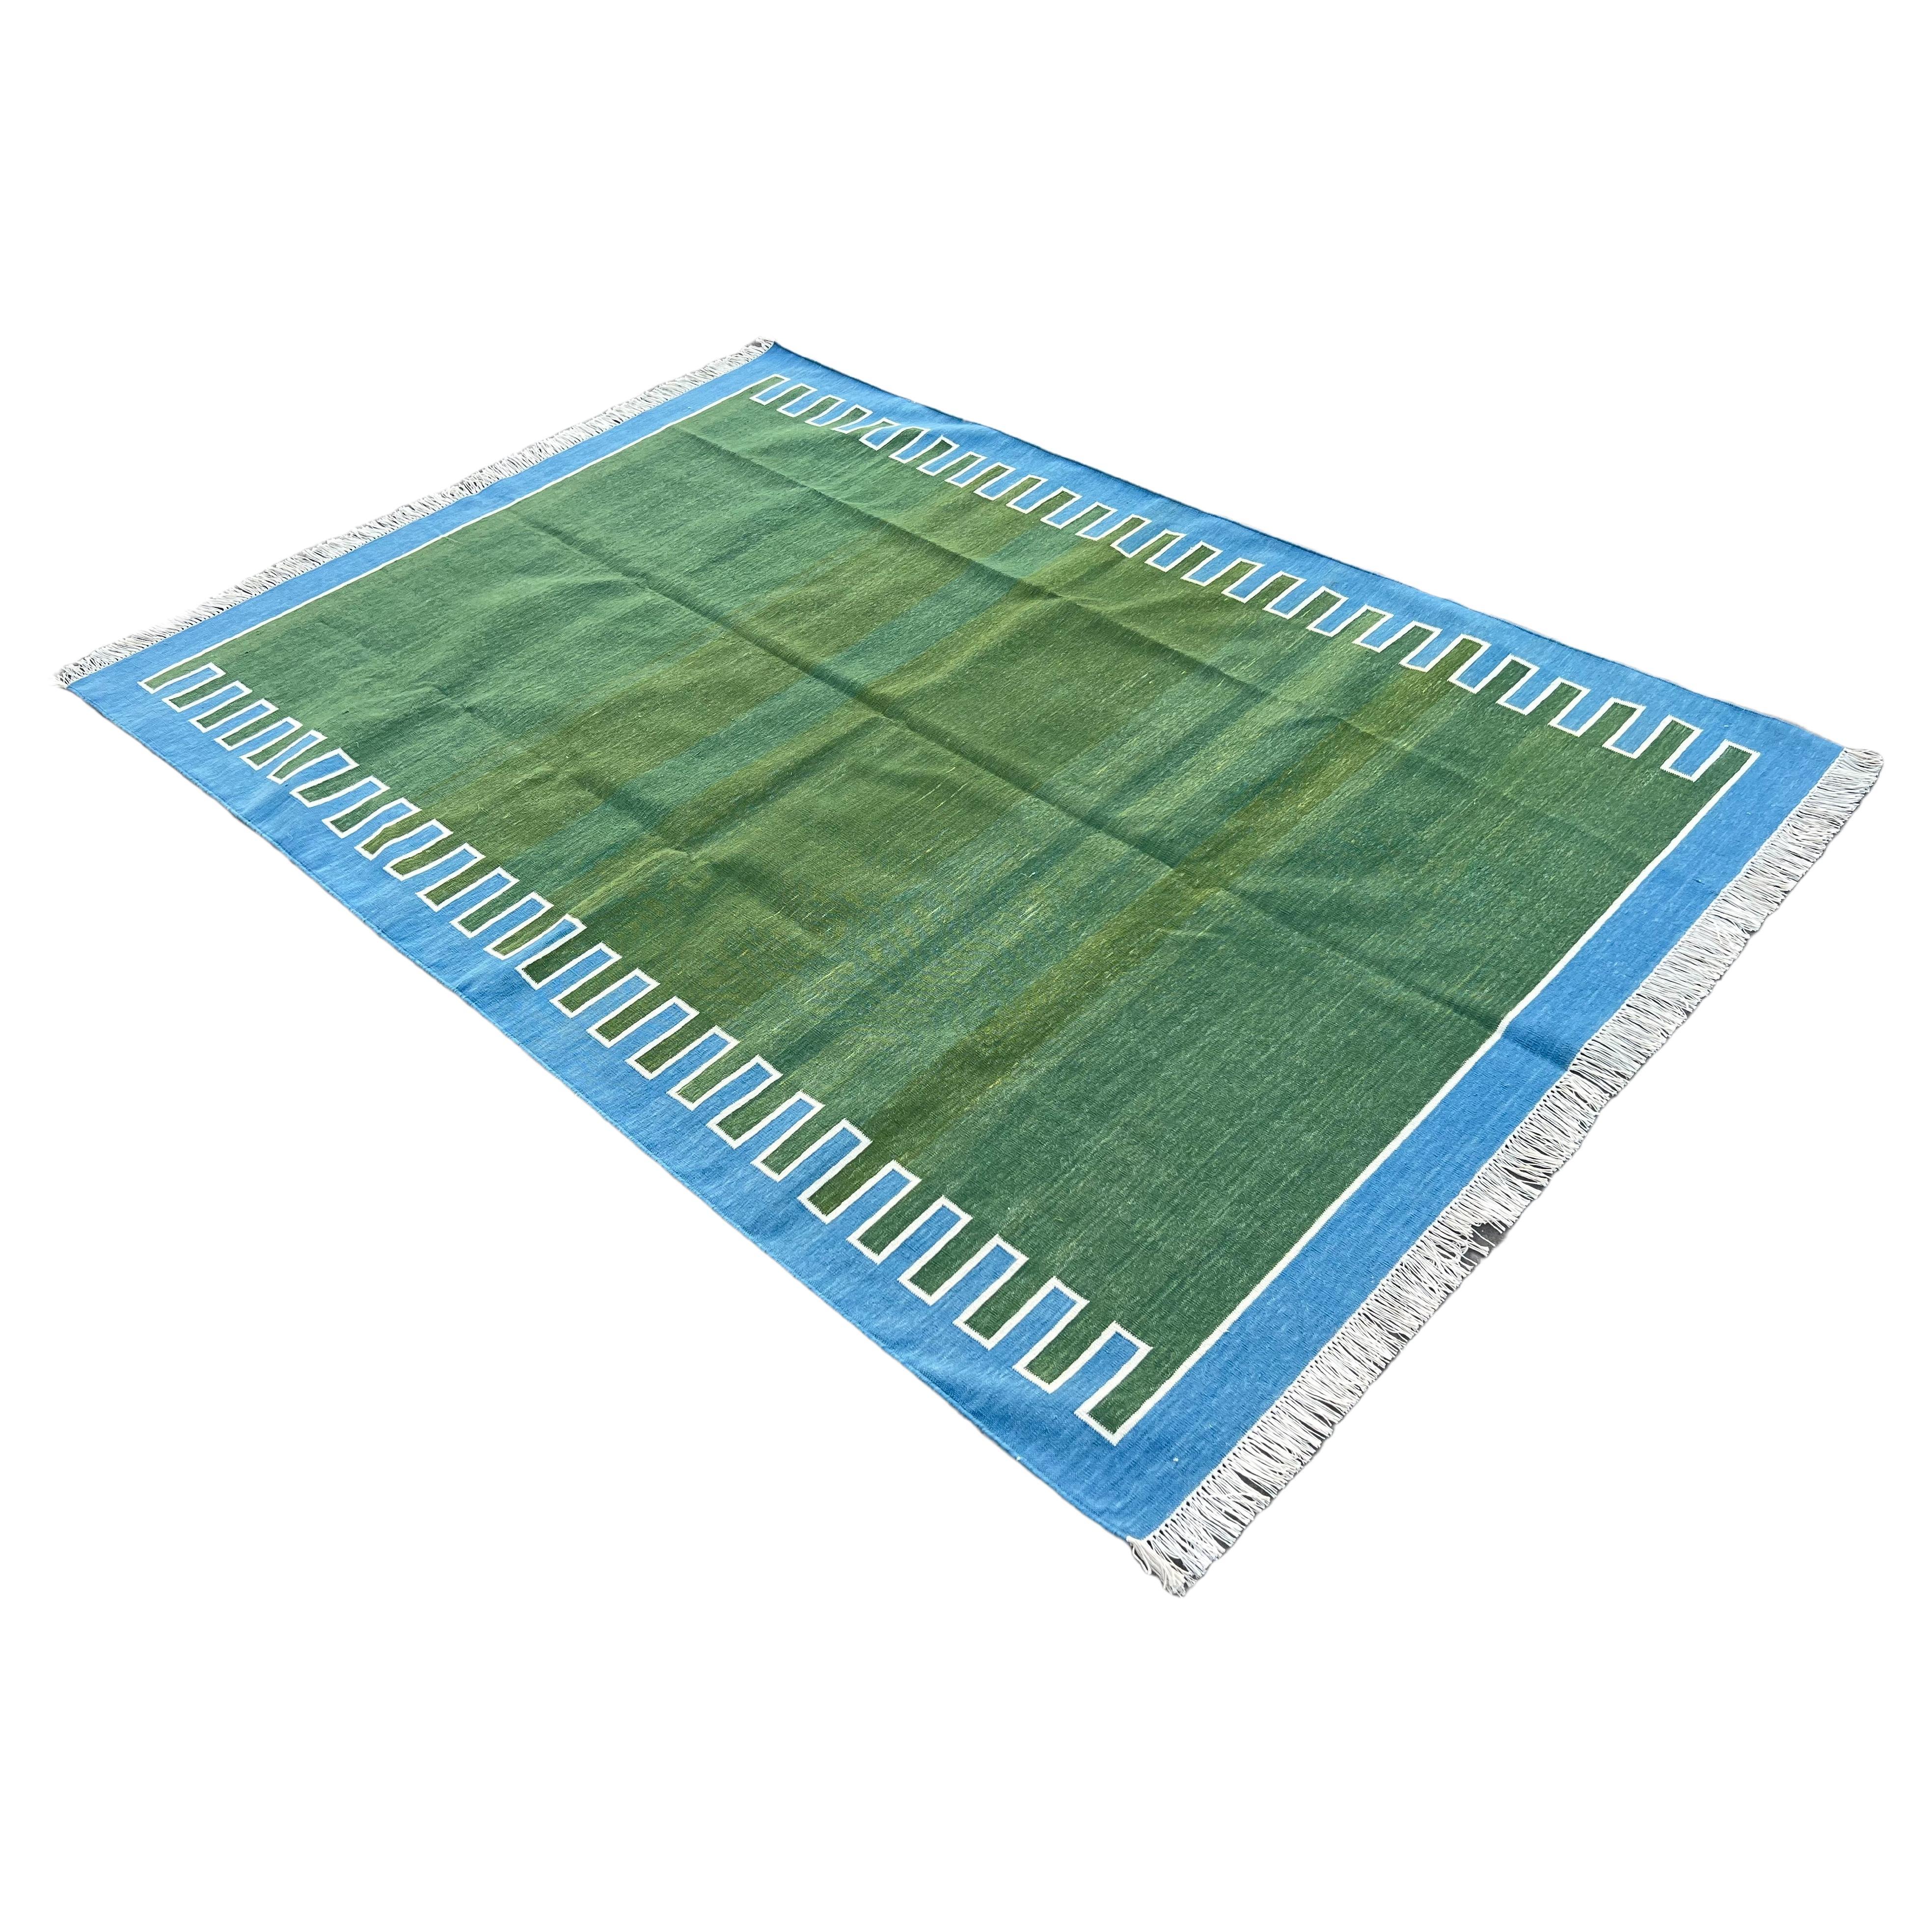 Handmade Cotton Area Flat Weave Rug, 5x7 Green And Blue Striped Indian Dhurrie